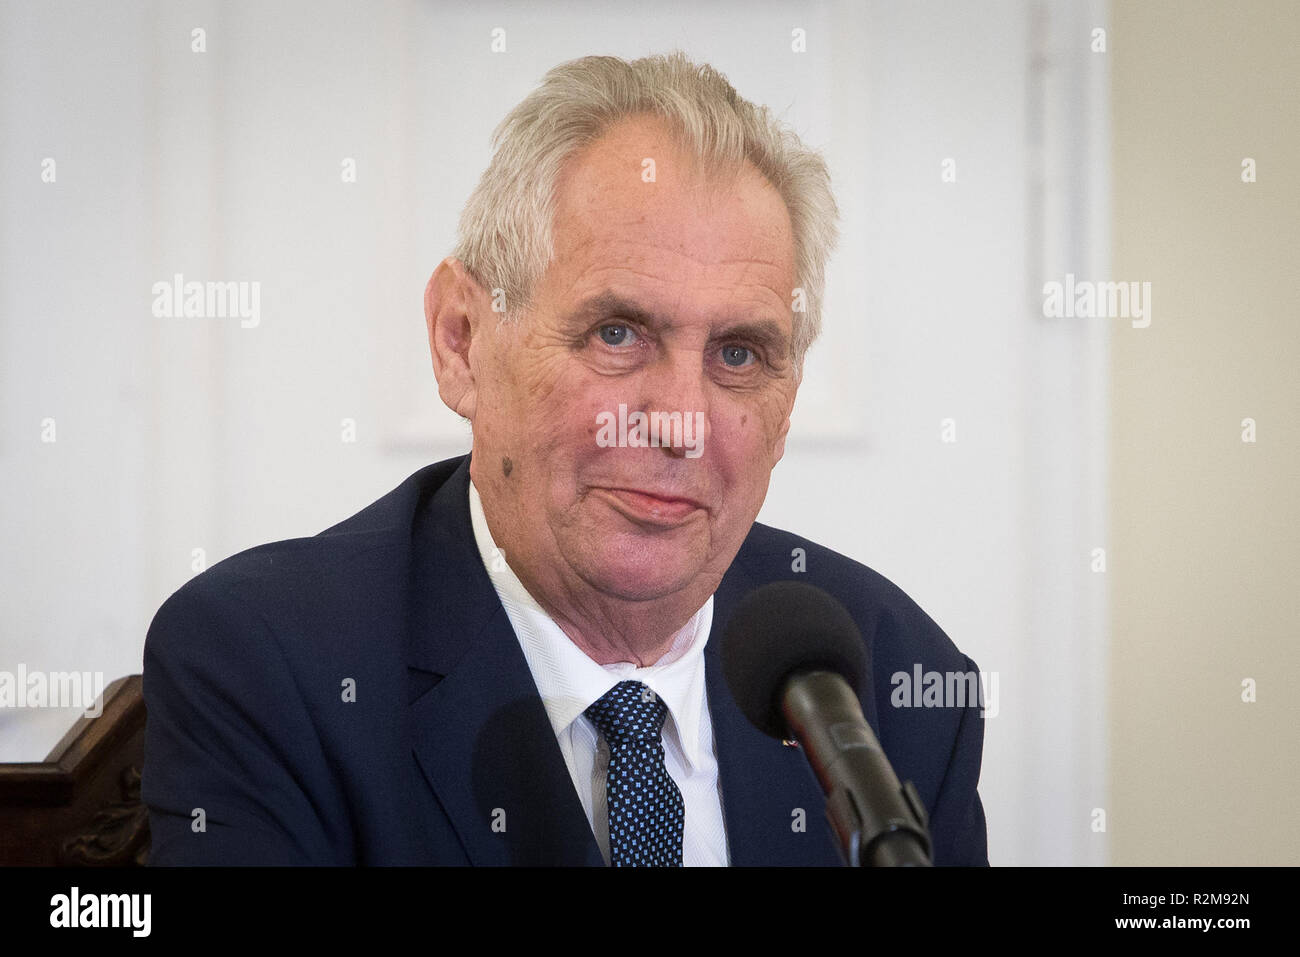 President of the Czech Republic Milos Zeman during the press conference with President of Poland Andrzej Duda at Presidential Palace in Warsaw, Poland on 10 May 2018 Stock Photo